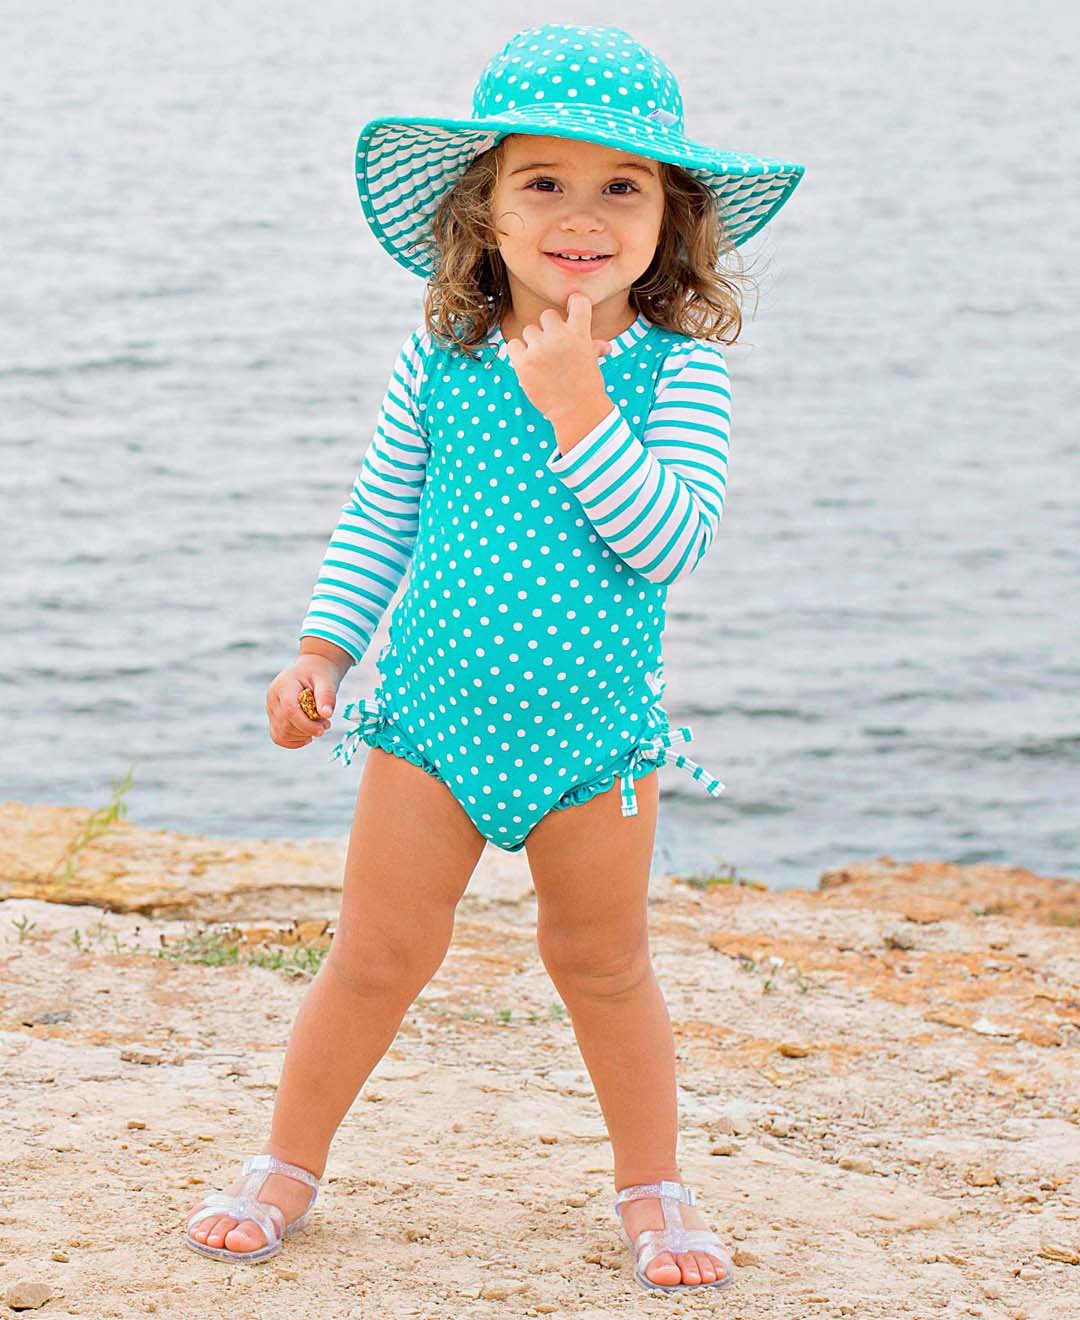 RuffleButts® Baby/Toddler Girls Long Sleeve One Piece Swimsuit with UPF 50+ Sun Protection